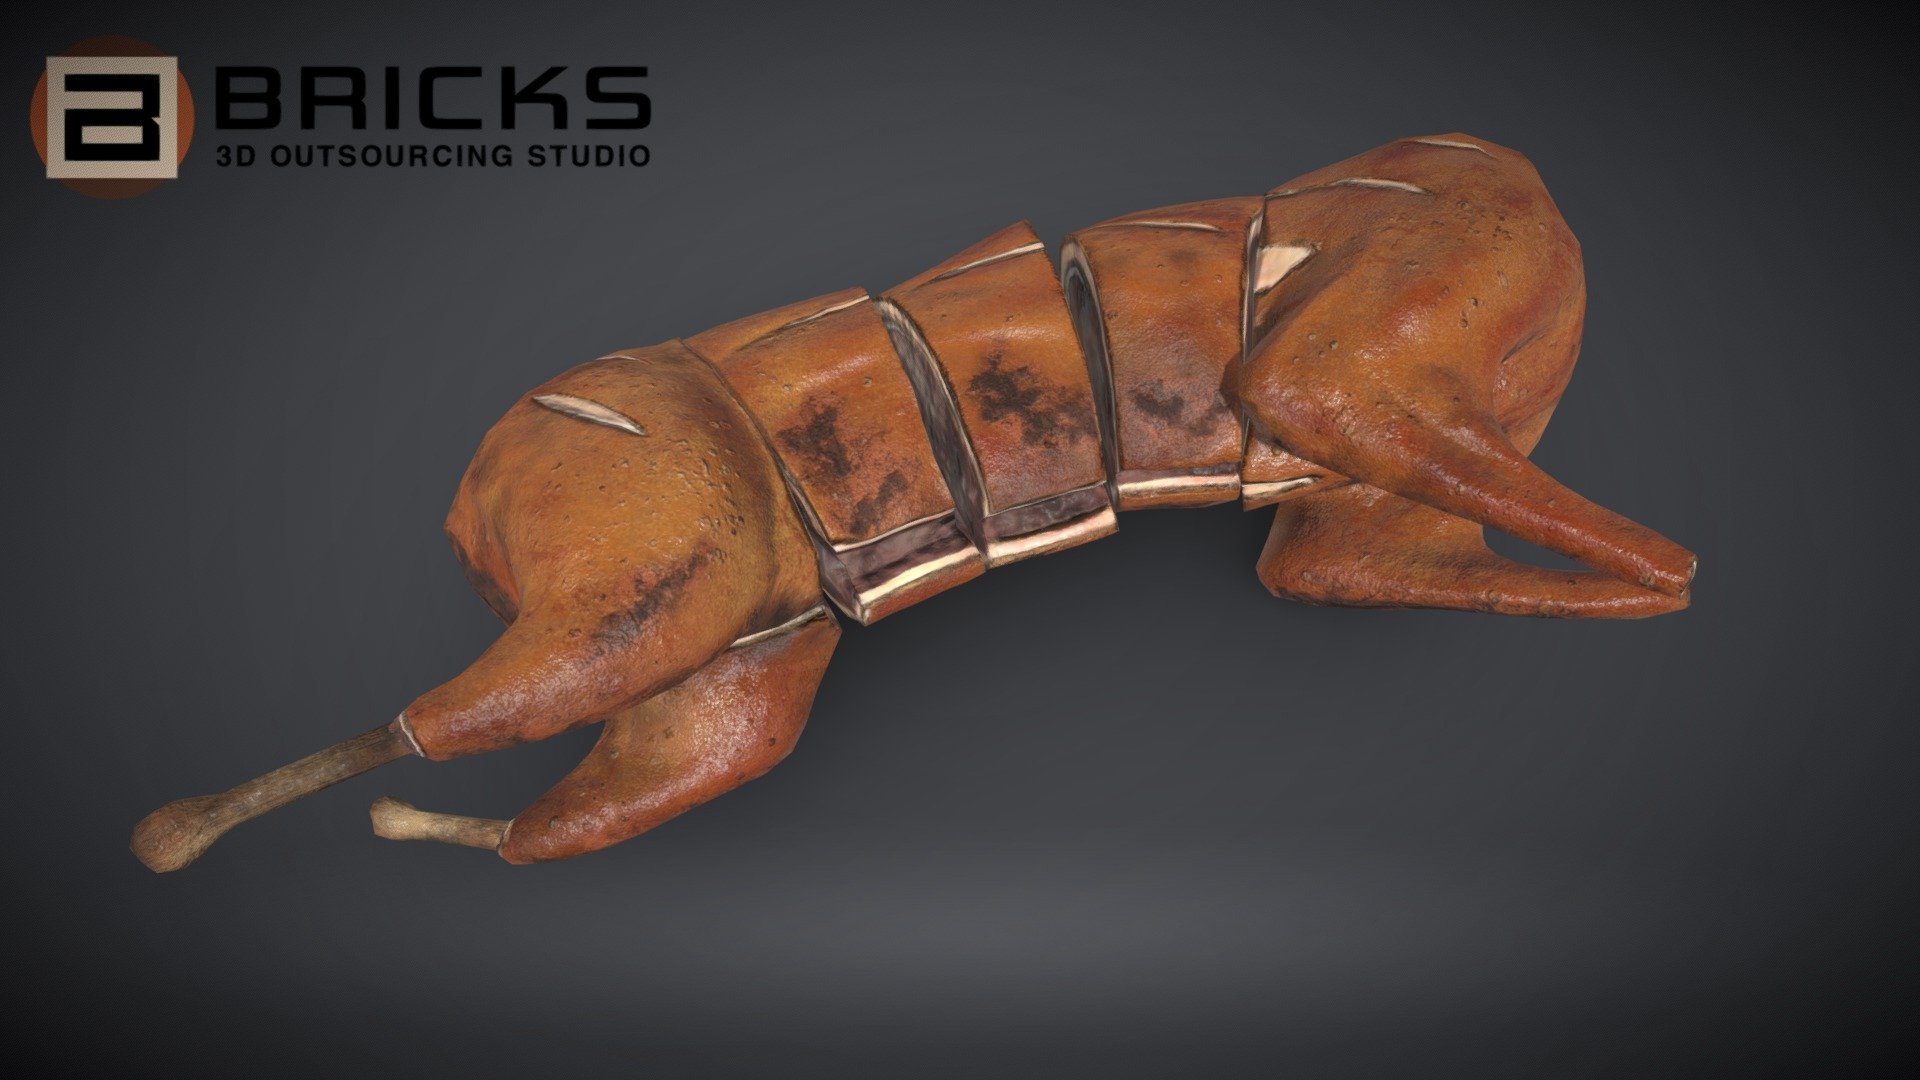 PBR Food Asset:
RabbitRoasting
Polycount: 2968
Vertex count: 1502
Texture Size: 2048px x 2048px
Normal: OpenGL

If you need any adjust in file please contact us: team@bricks3dstudio.com

Hire us: tringuyen@bricks3dstudio.com
Here is us: https://www.bricks3dstudio.com/
        https://www.artstation.com/bricksstudio
        https://www.facebook.com/Bricks3dstudio/
        https://www.linkedin.com/in/bricks-studio-b10462252/ - RabbitRoasting - Buy Royalty Free 3D model by Bricks Studio (@bricks3dstudio) 3d model